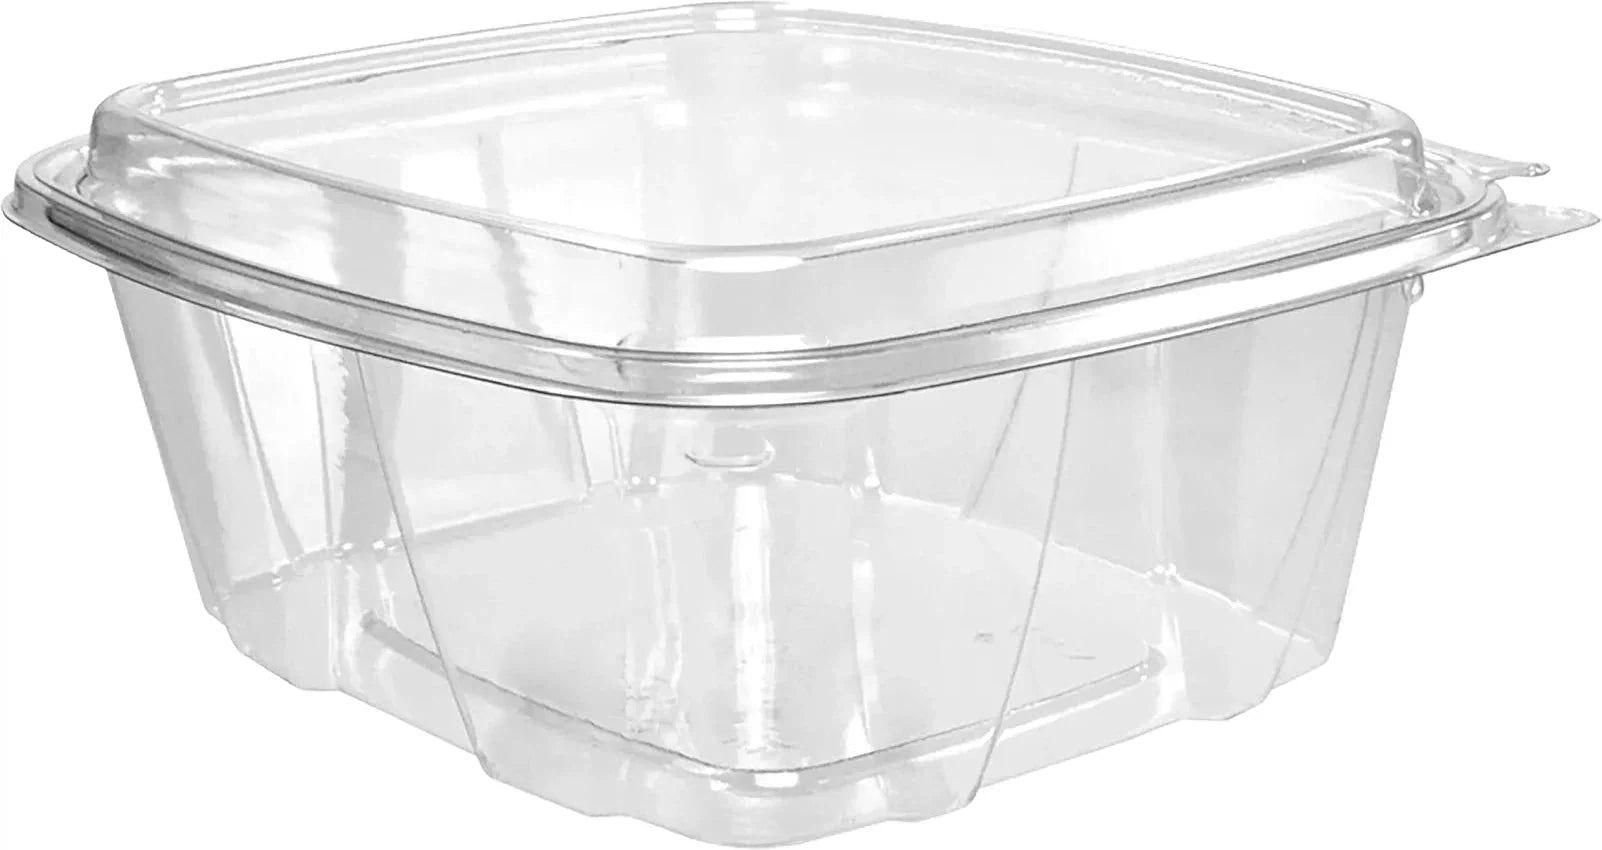 Dart Container - 32 Oz PET Plastic Tamper-Evident/Resistant Container with Clear Dome Lid - CH32DED